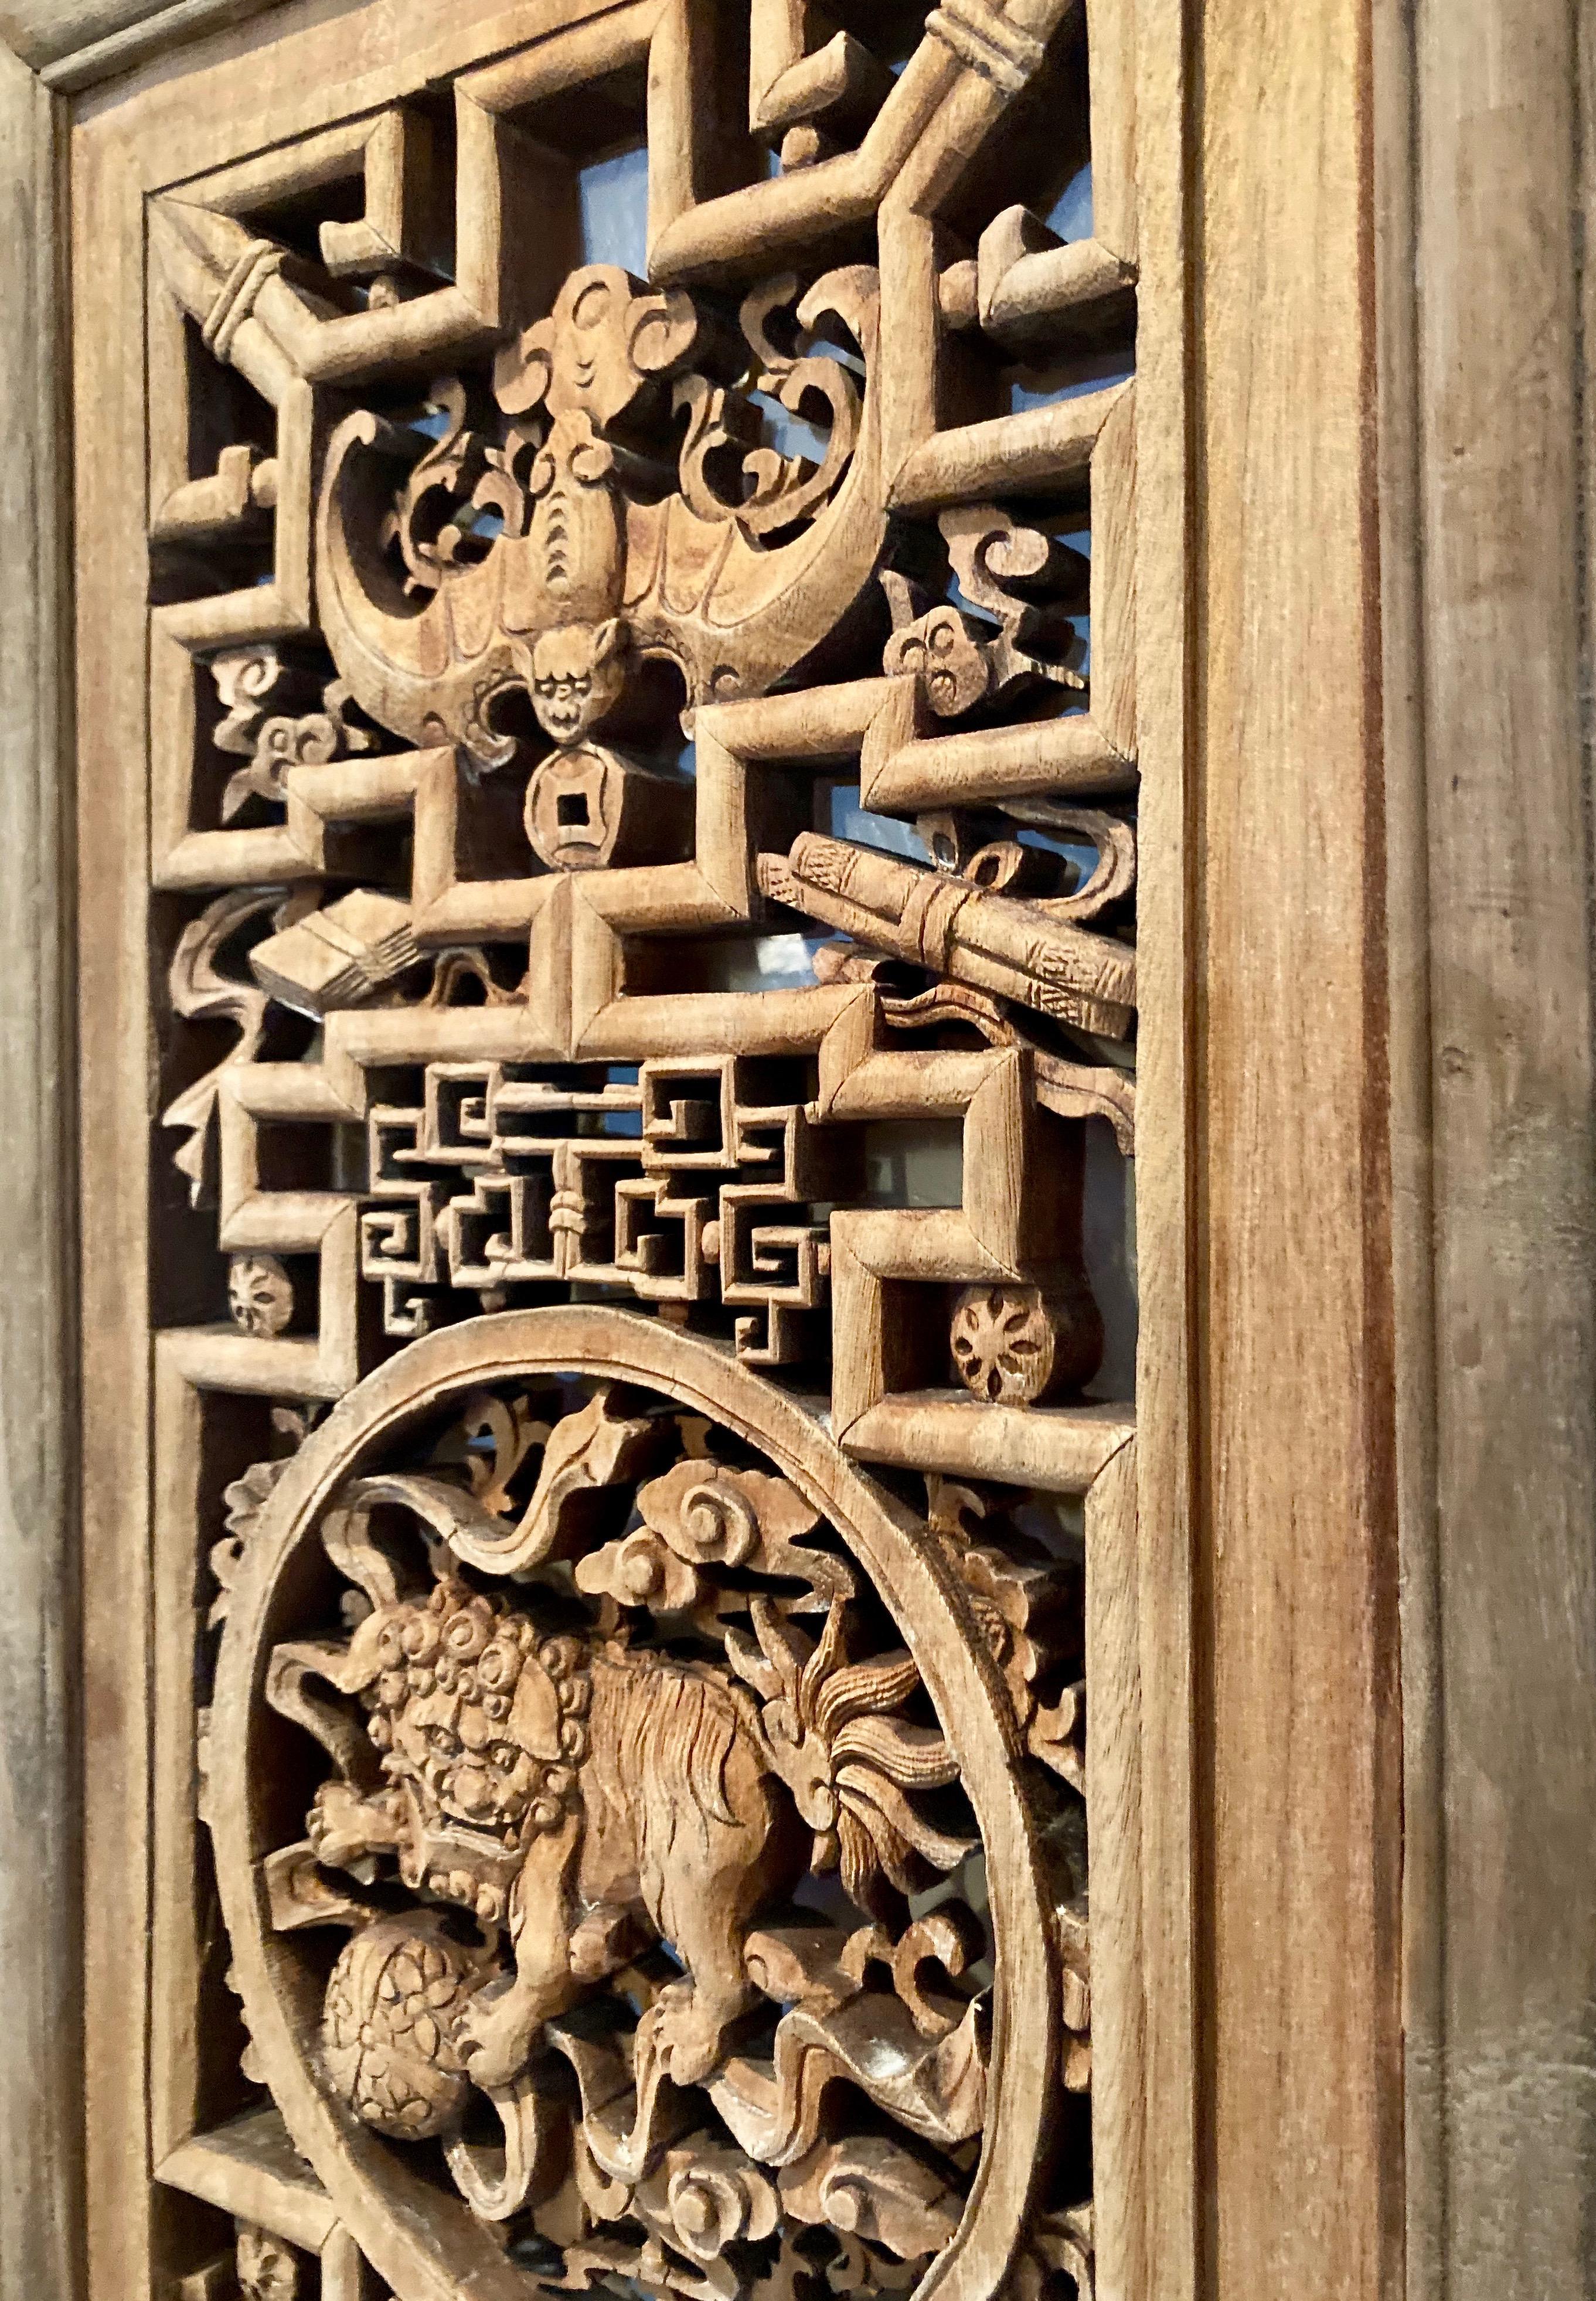 The intricate design in this framed panel includes a circular center carving with a mythical creature, and a surrounding bat motif.